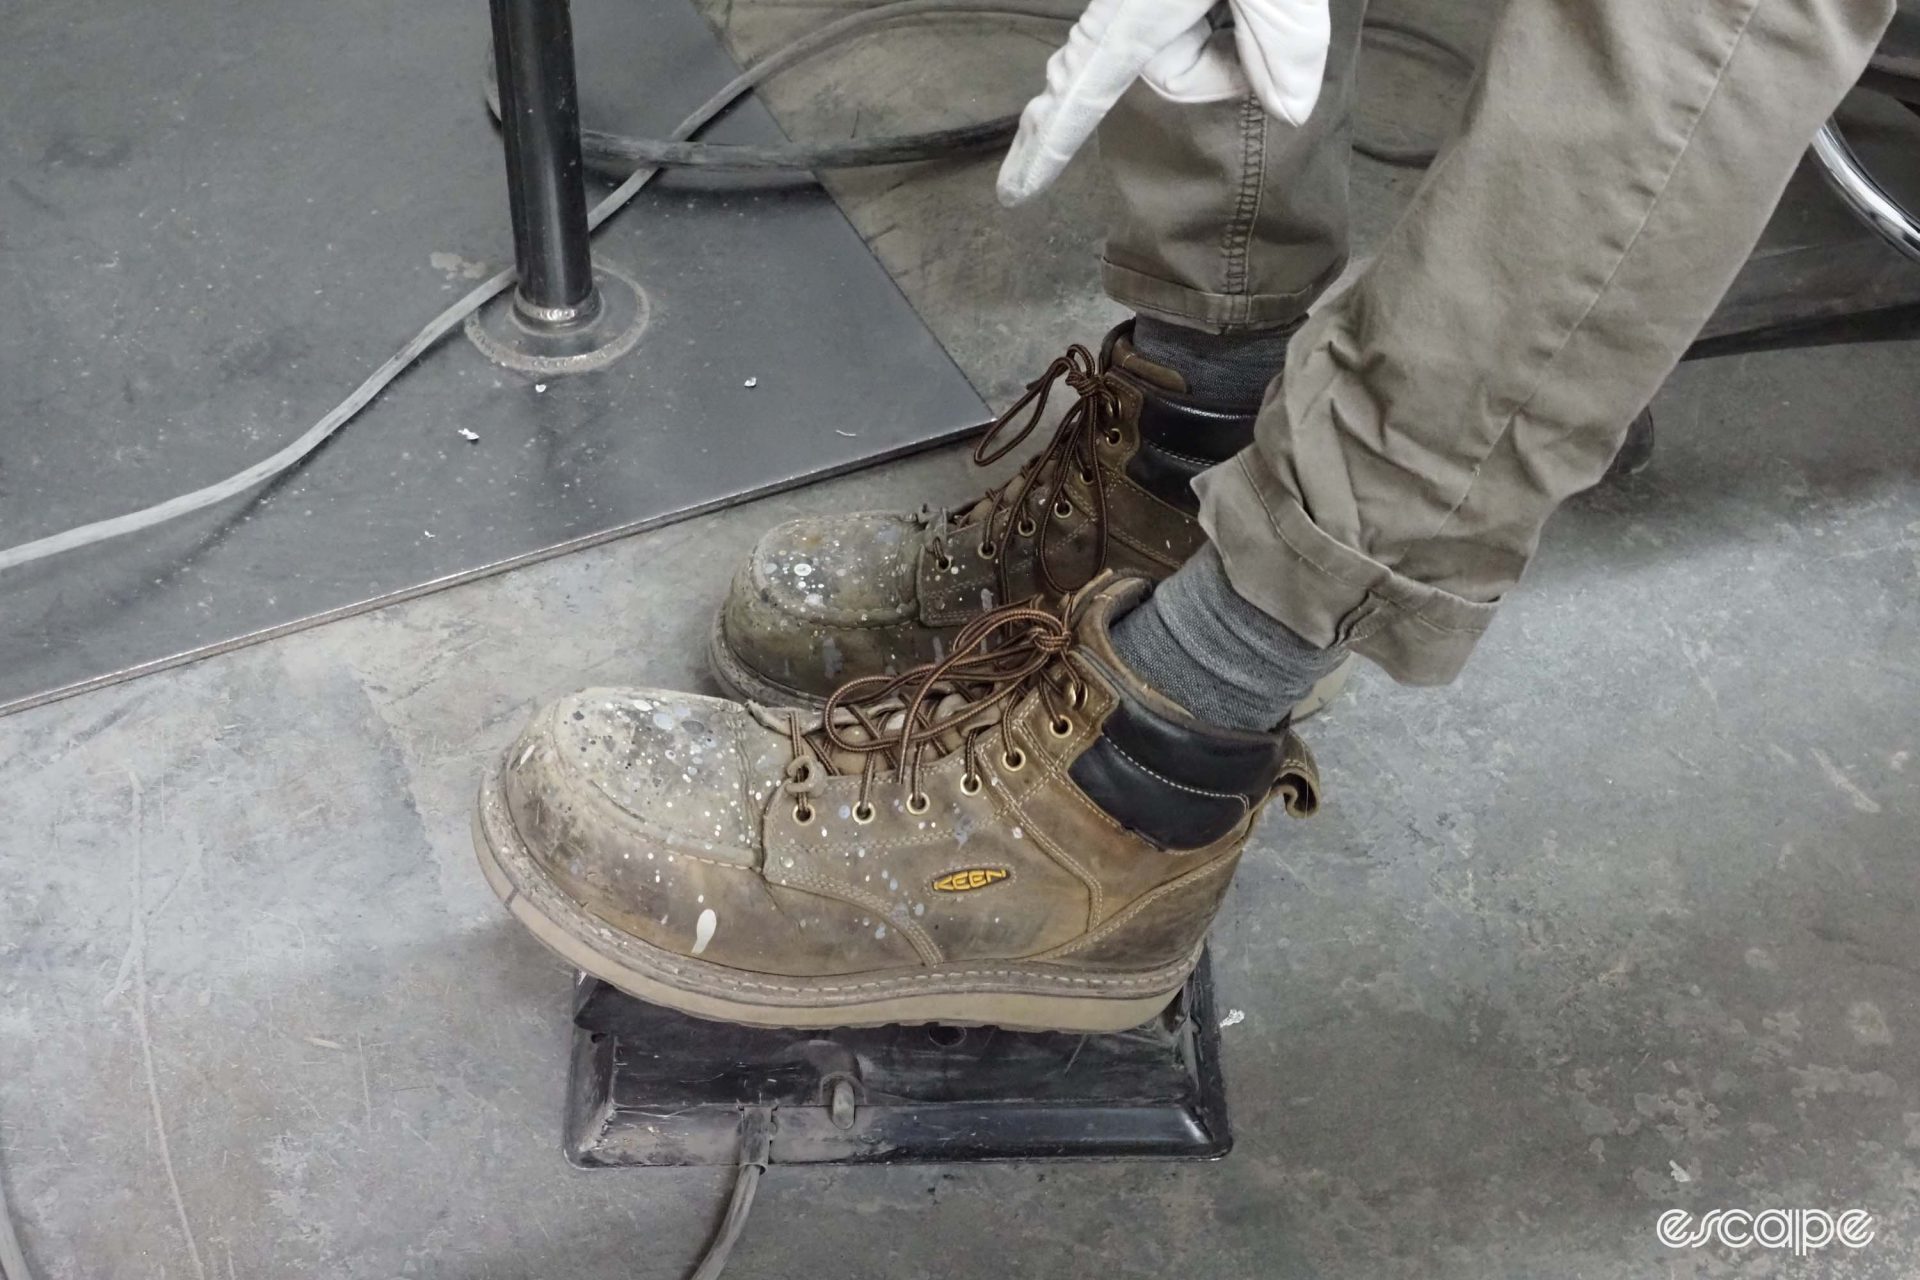 A welder in weathered Keen boots operates a welding foot pedal to control amperage. The boots are stained and dappled with paint and other substances.